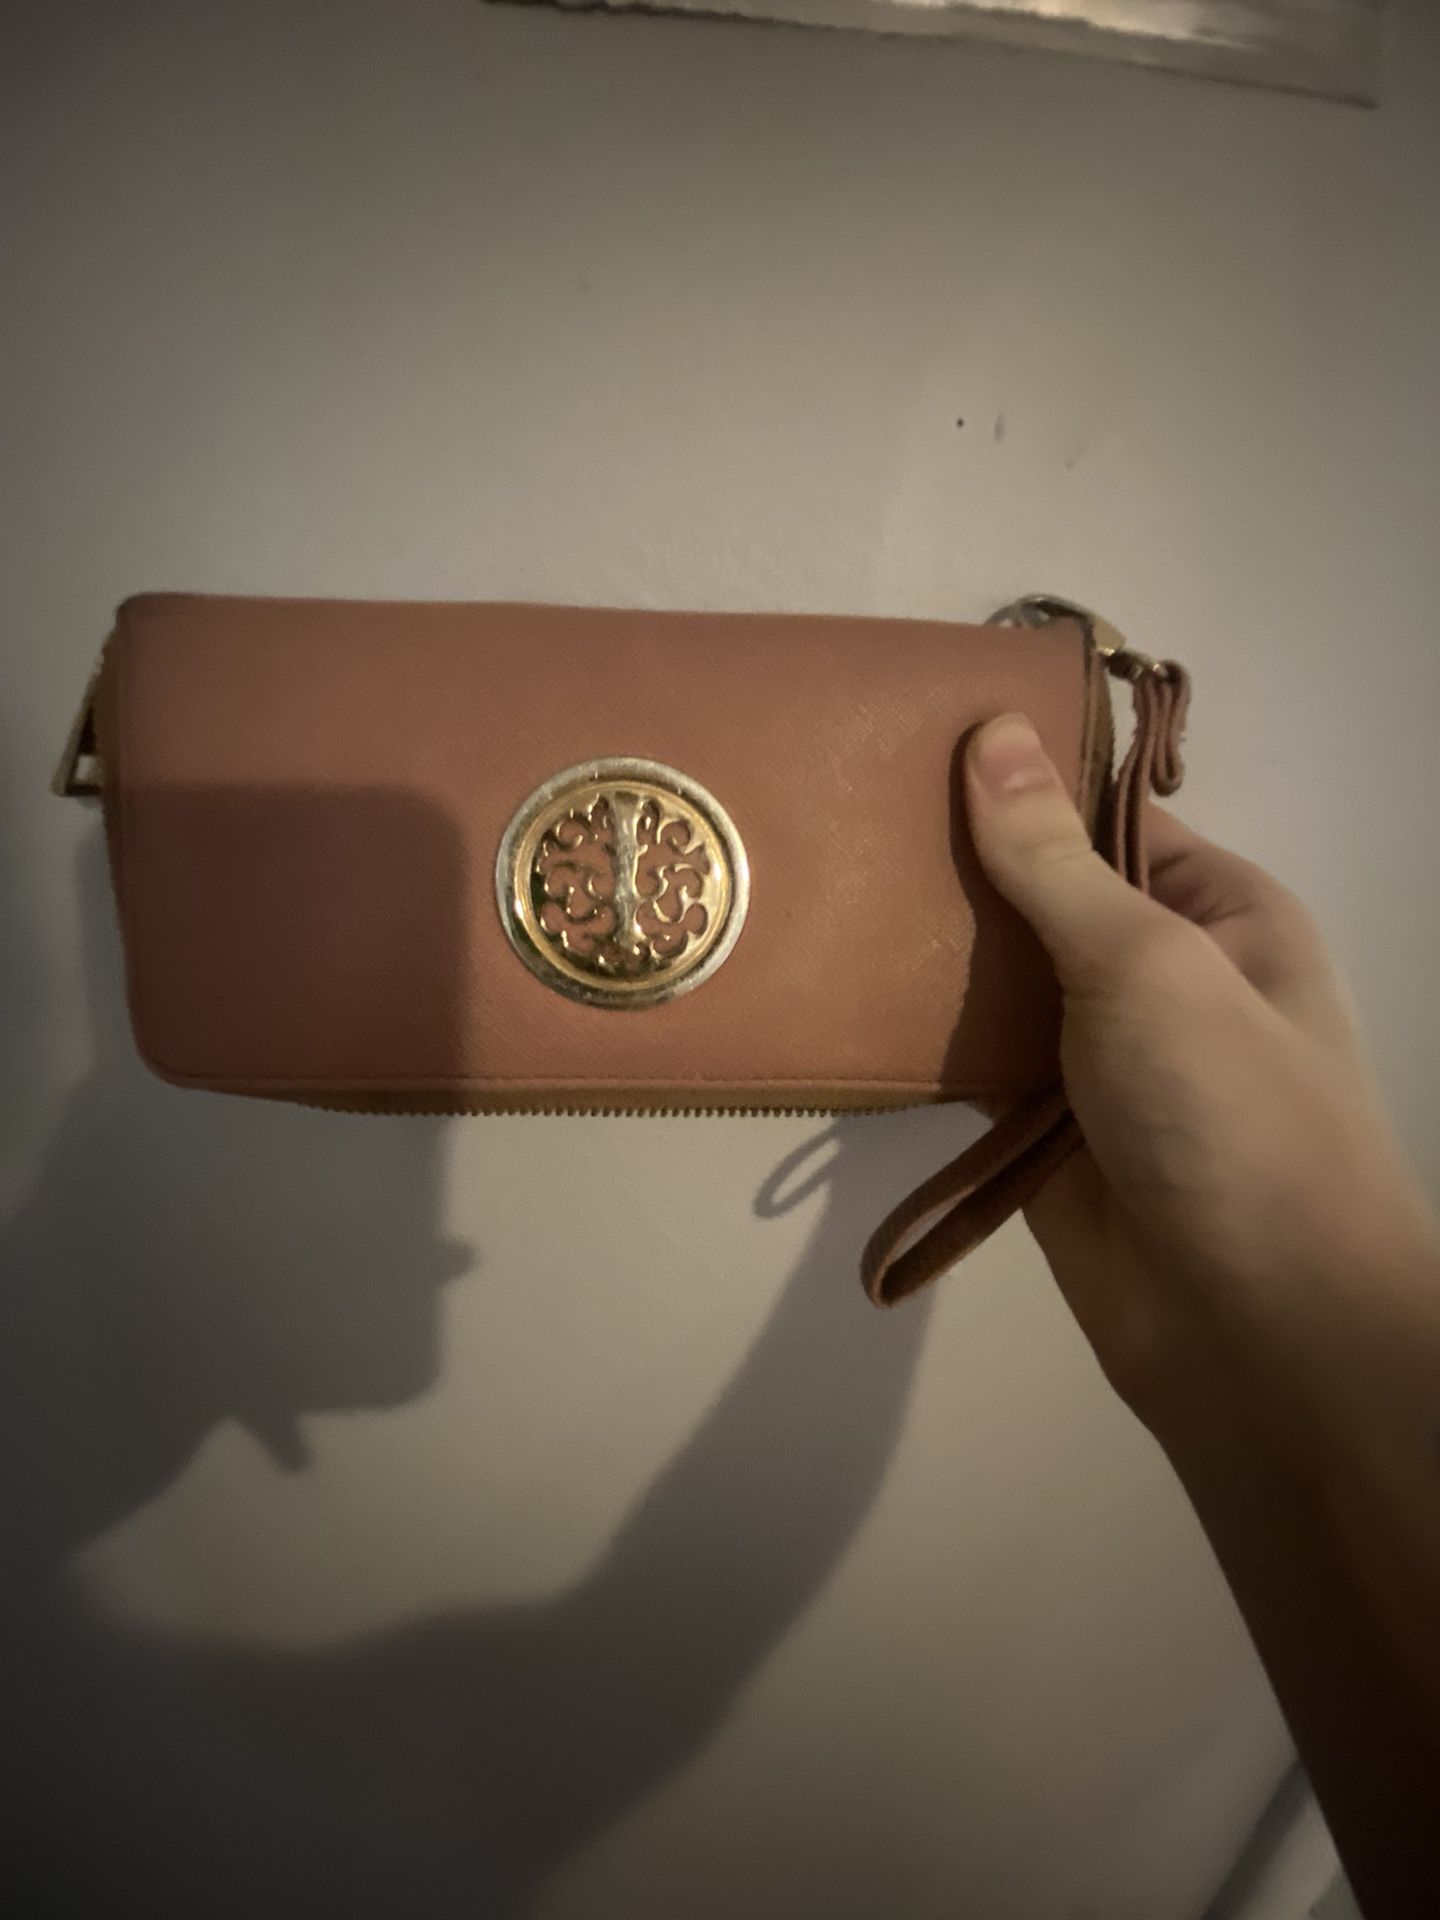 Purse And Wallet 